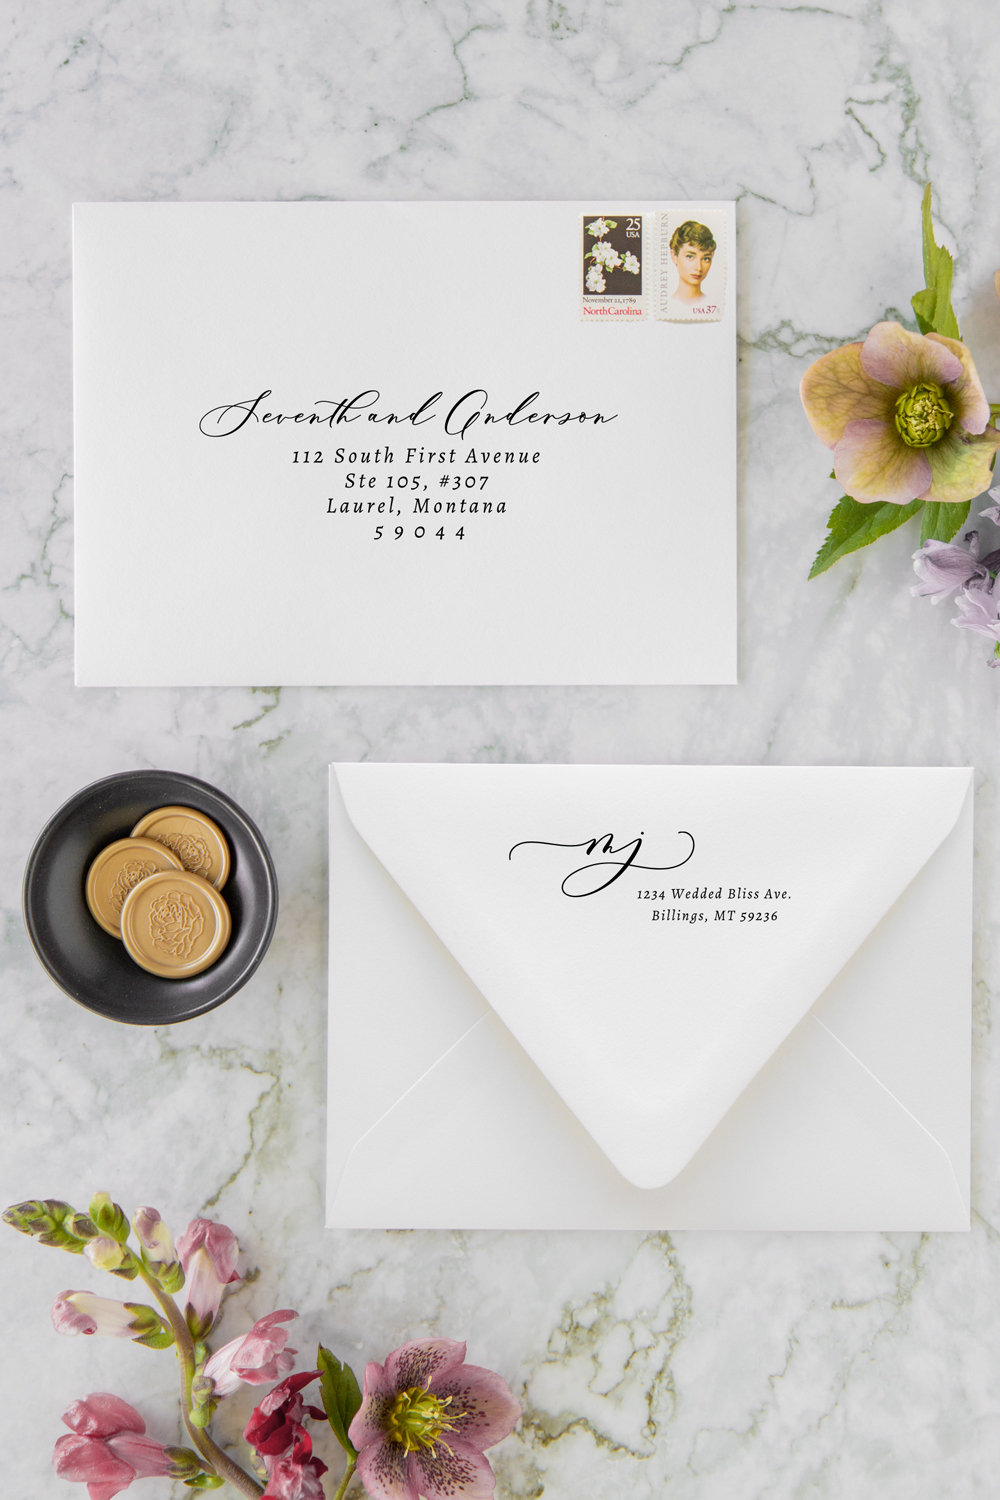 cheap-wedding-save-the-date-cards-seventhandanderson